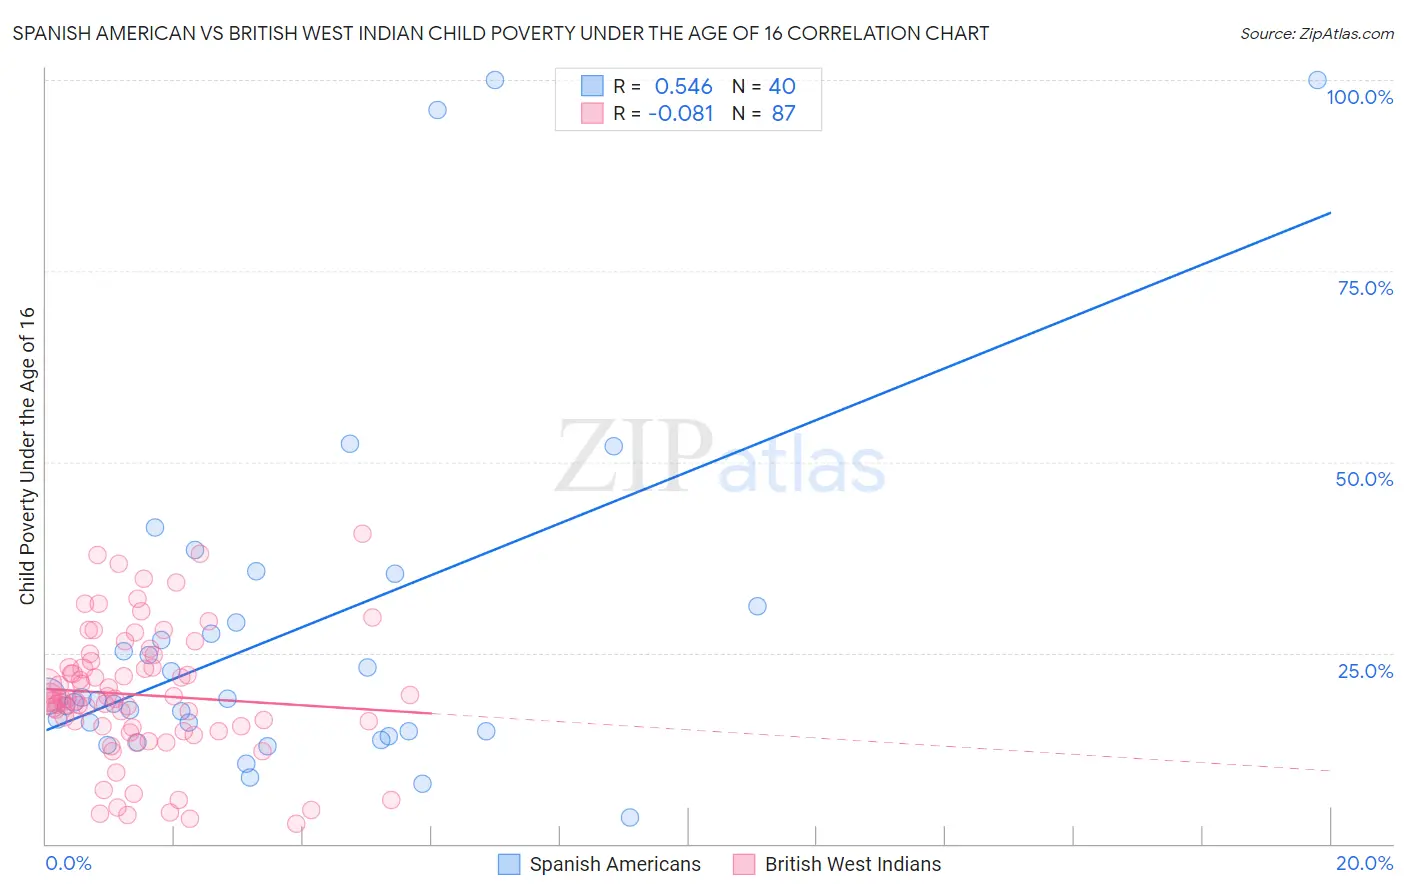 Spanish American vs British West Indian Child Poverty Under the Age of 16